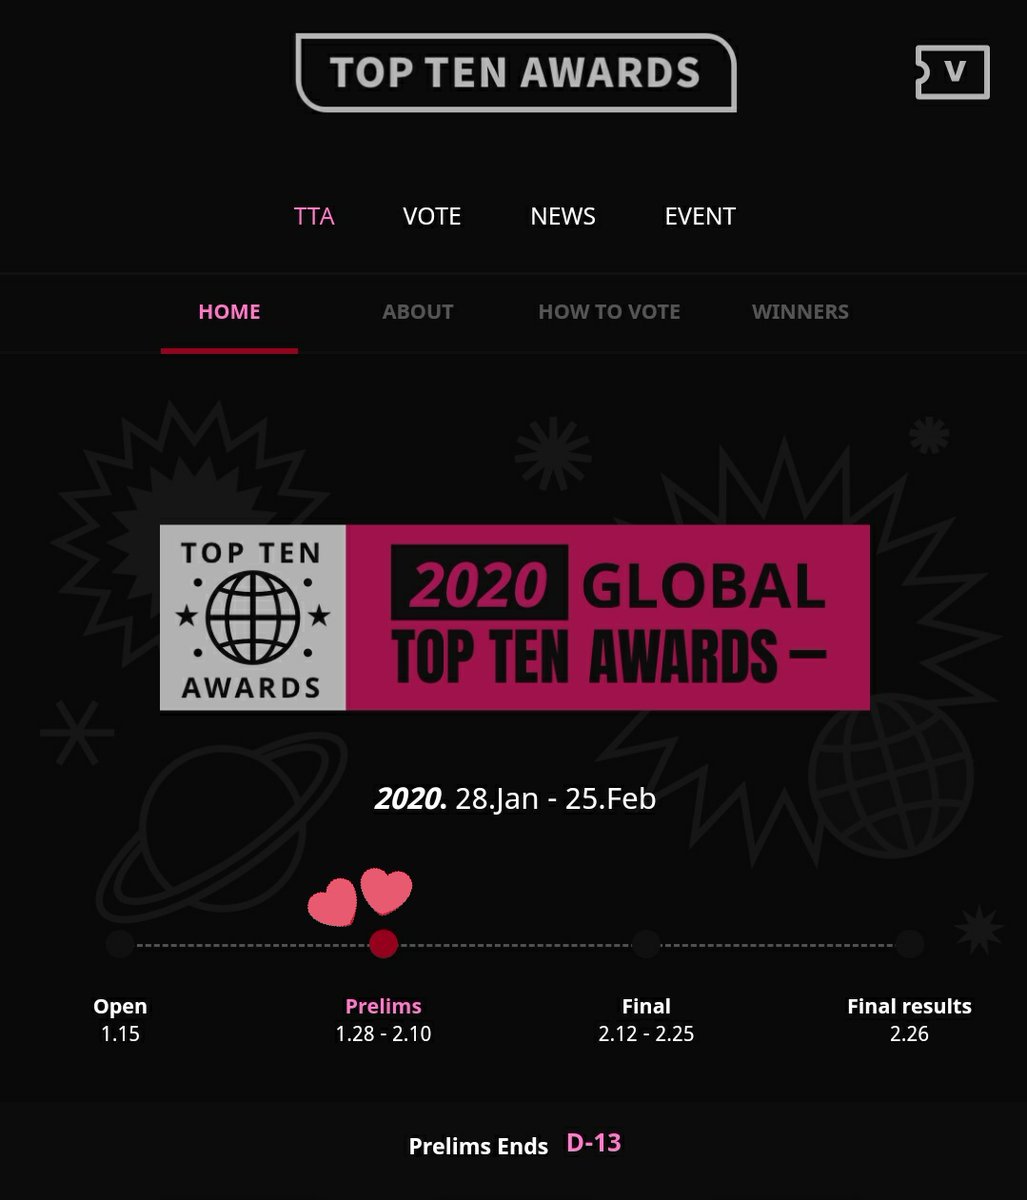 [📢] ATTENTION ATINY! GLOBAL TOP TEN AWARDS Prelim voting has started! Spread the word.
Duration: January 28-February10
.
Atiny from 10Countries listed below please vote for ATEEZ 
🗳tenasia.musicawards.co.kr
.
Tutorial below 👇
@ATEEZofficial  #ATEEZ #에이티즈 #エイティーズ